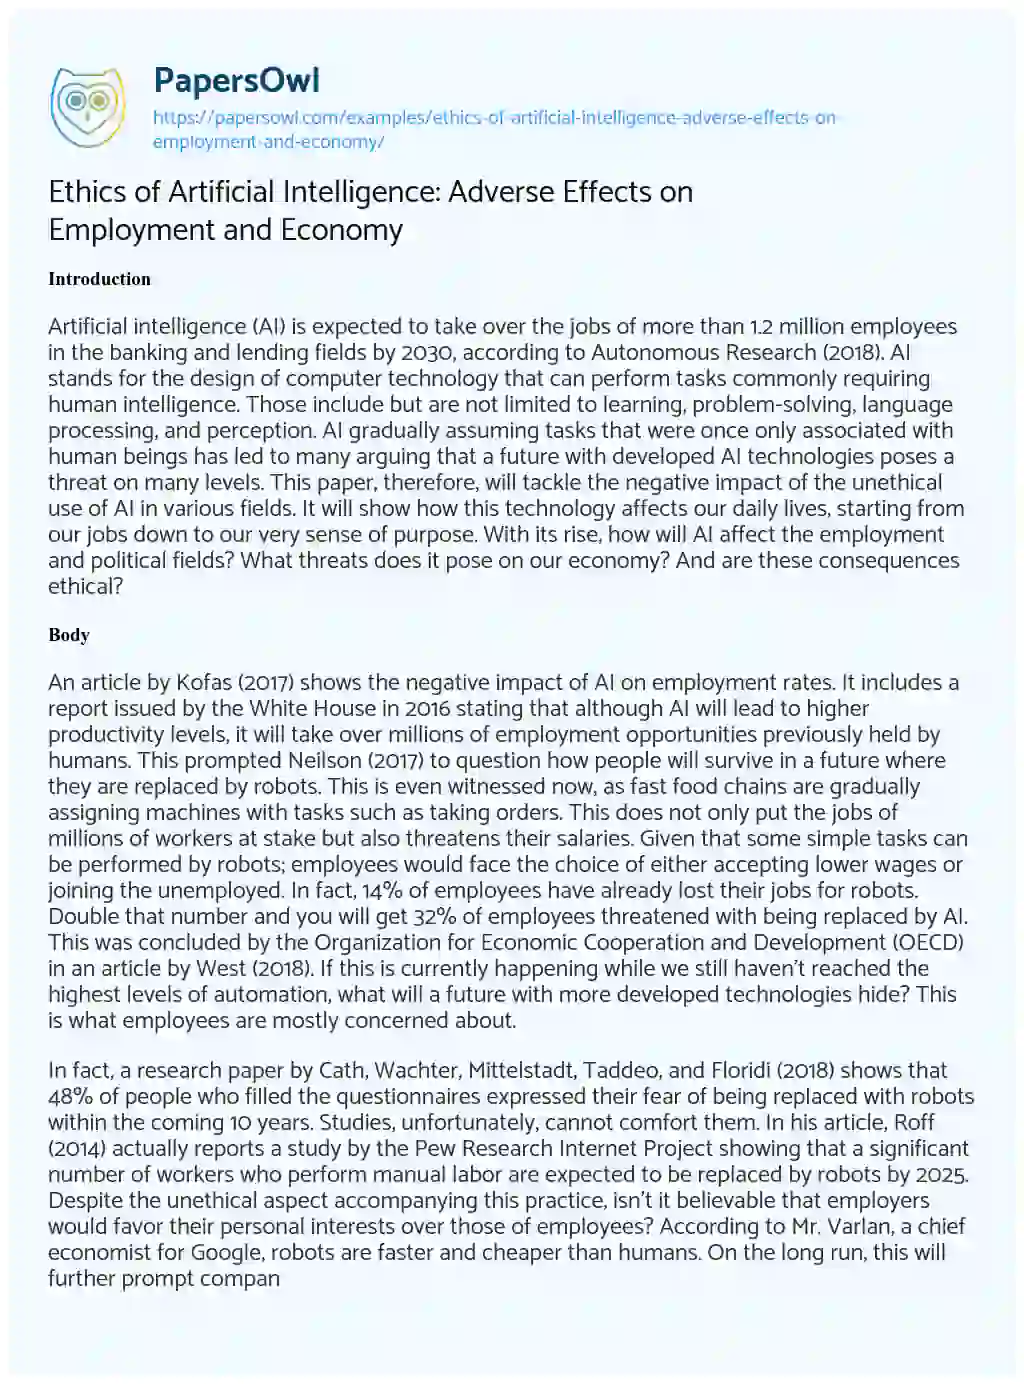 Essay on Ethics of Artificial Intelligence: Adverse Effects on Employment and Economy